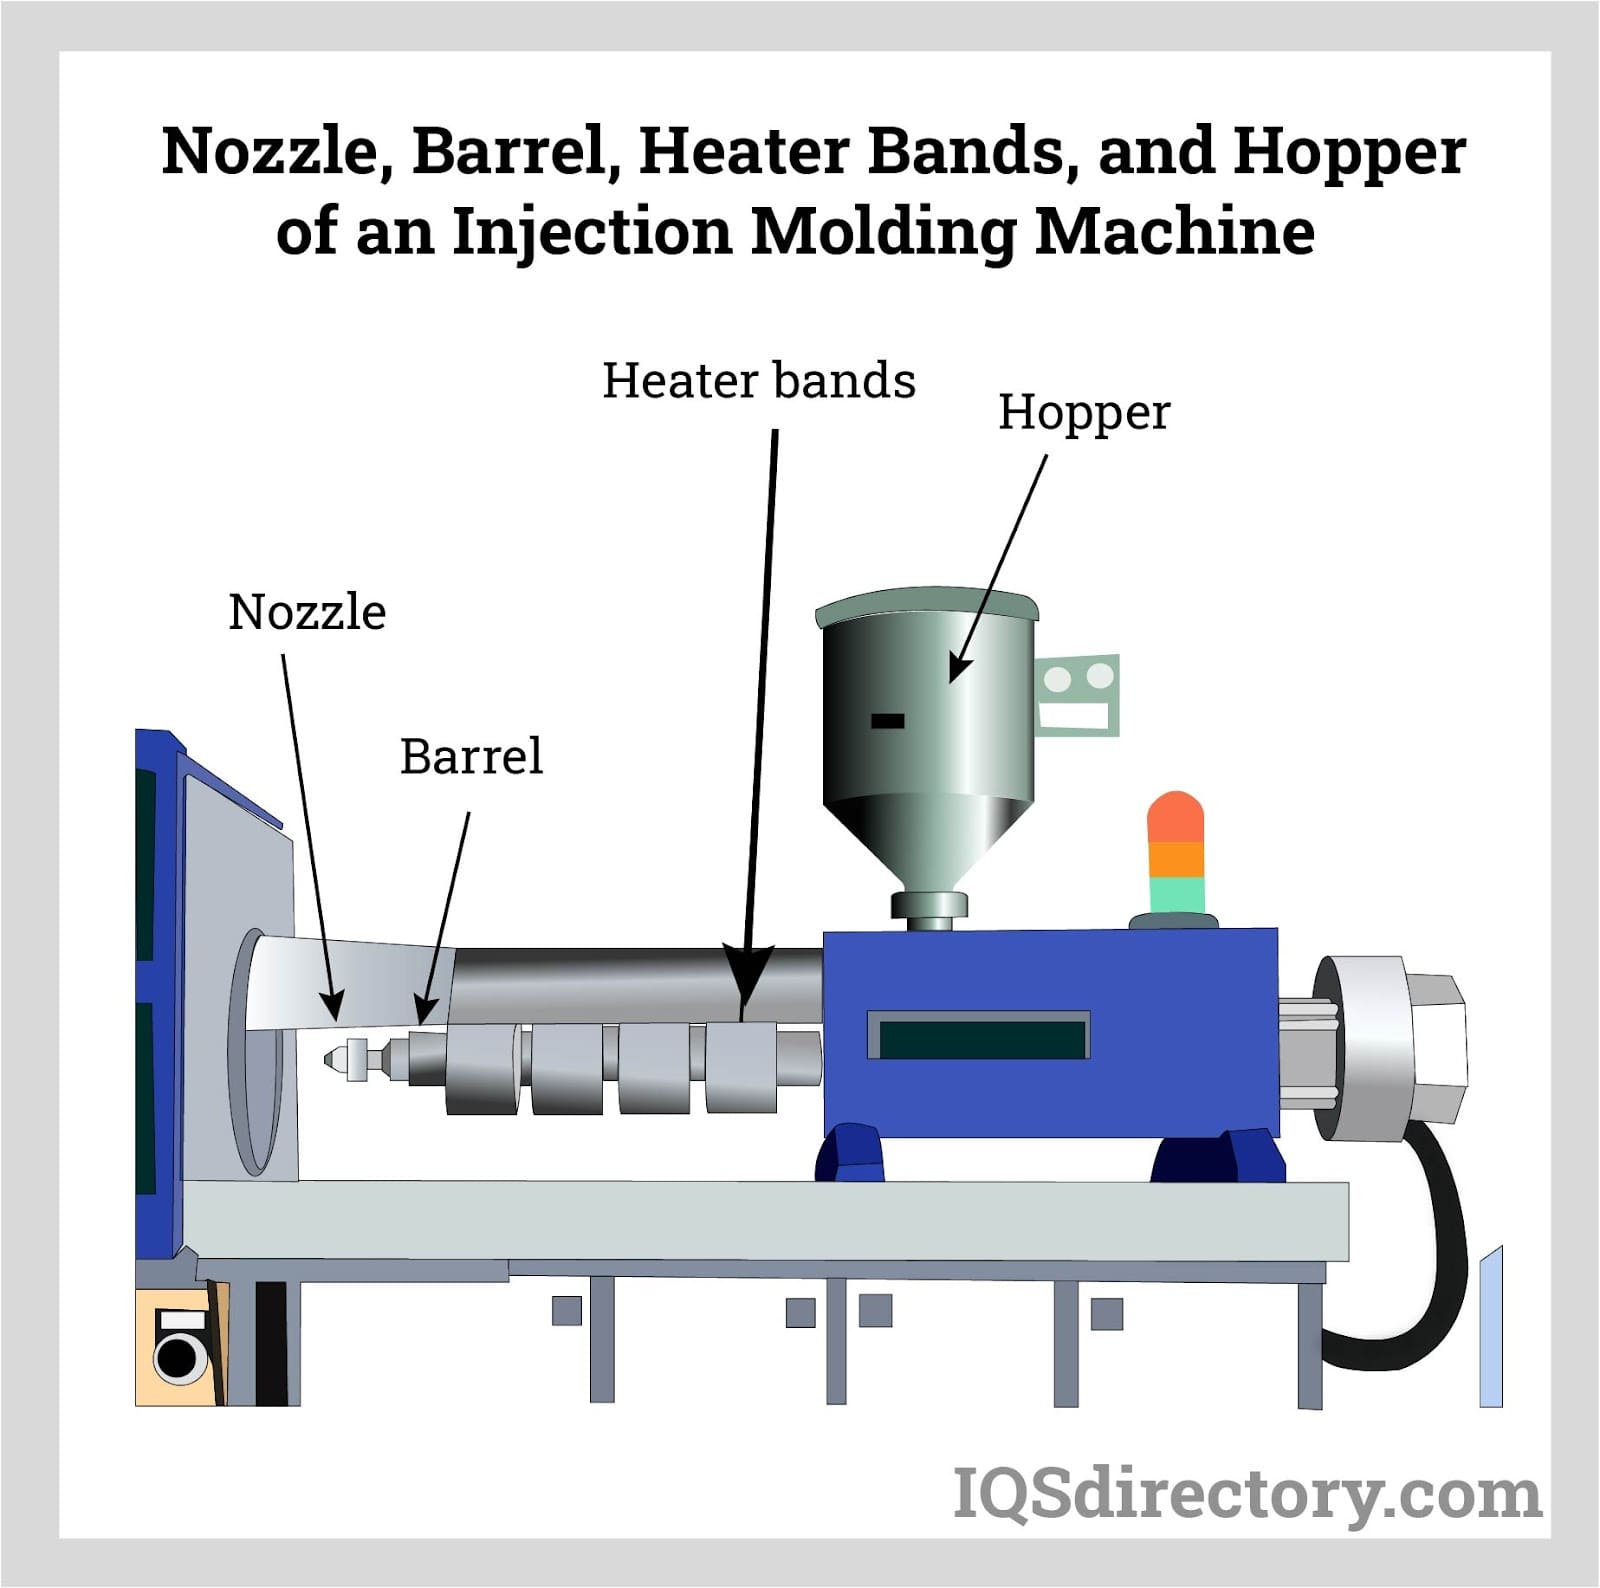 Nozzle, Barrel, Heater Bands, and Hopper of an Injection Molding Machine